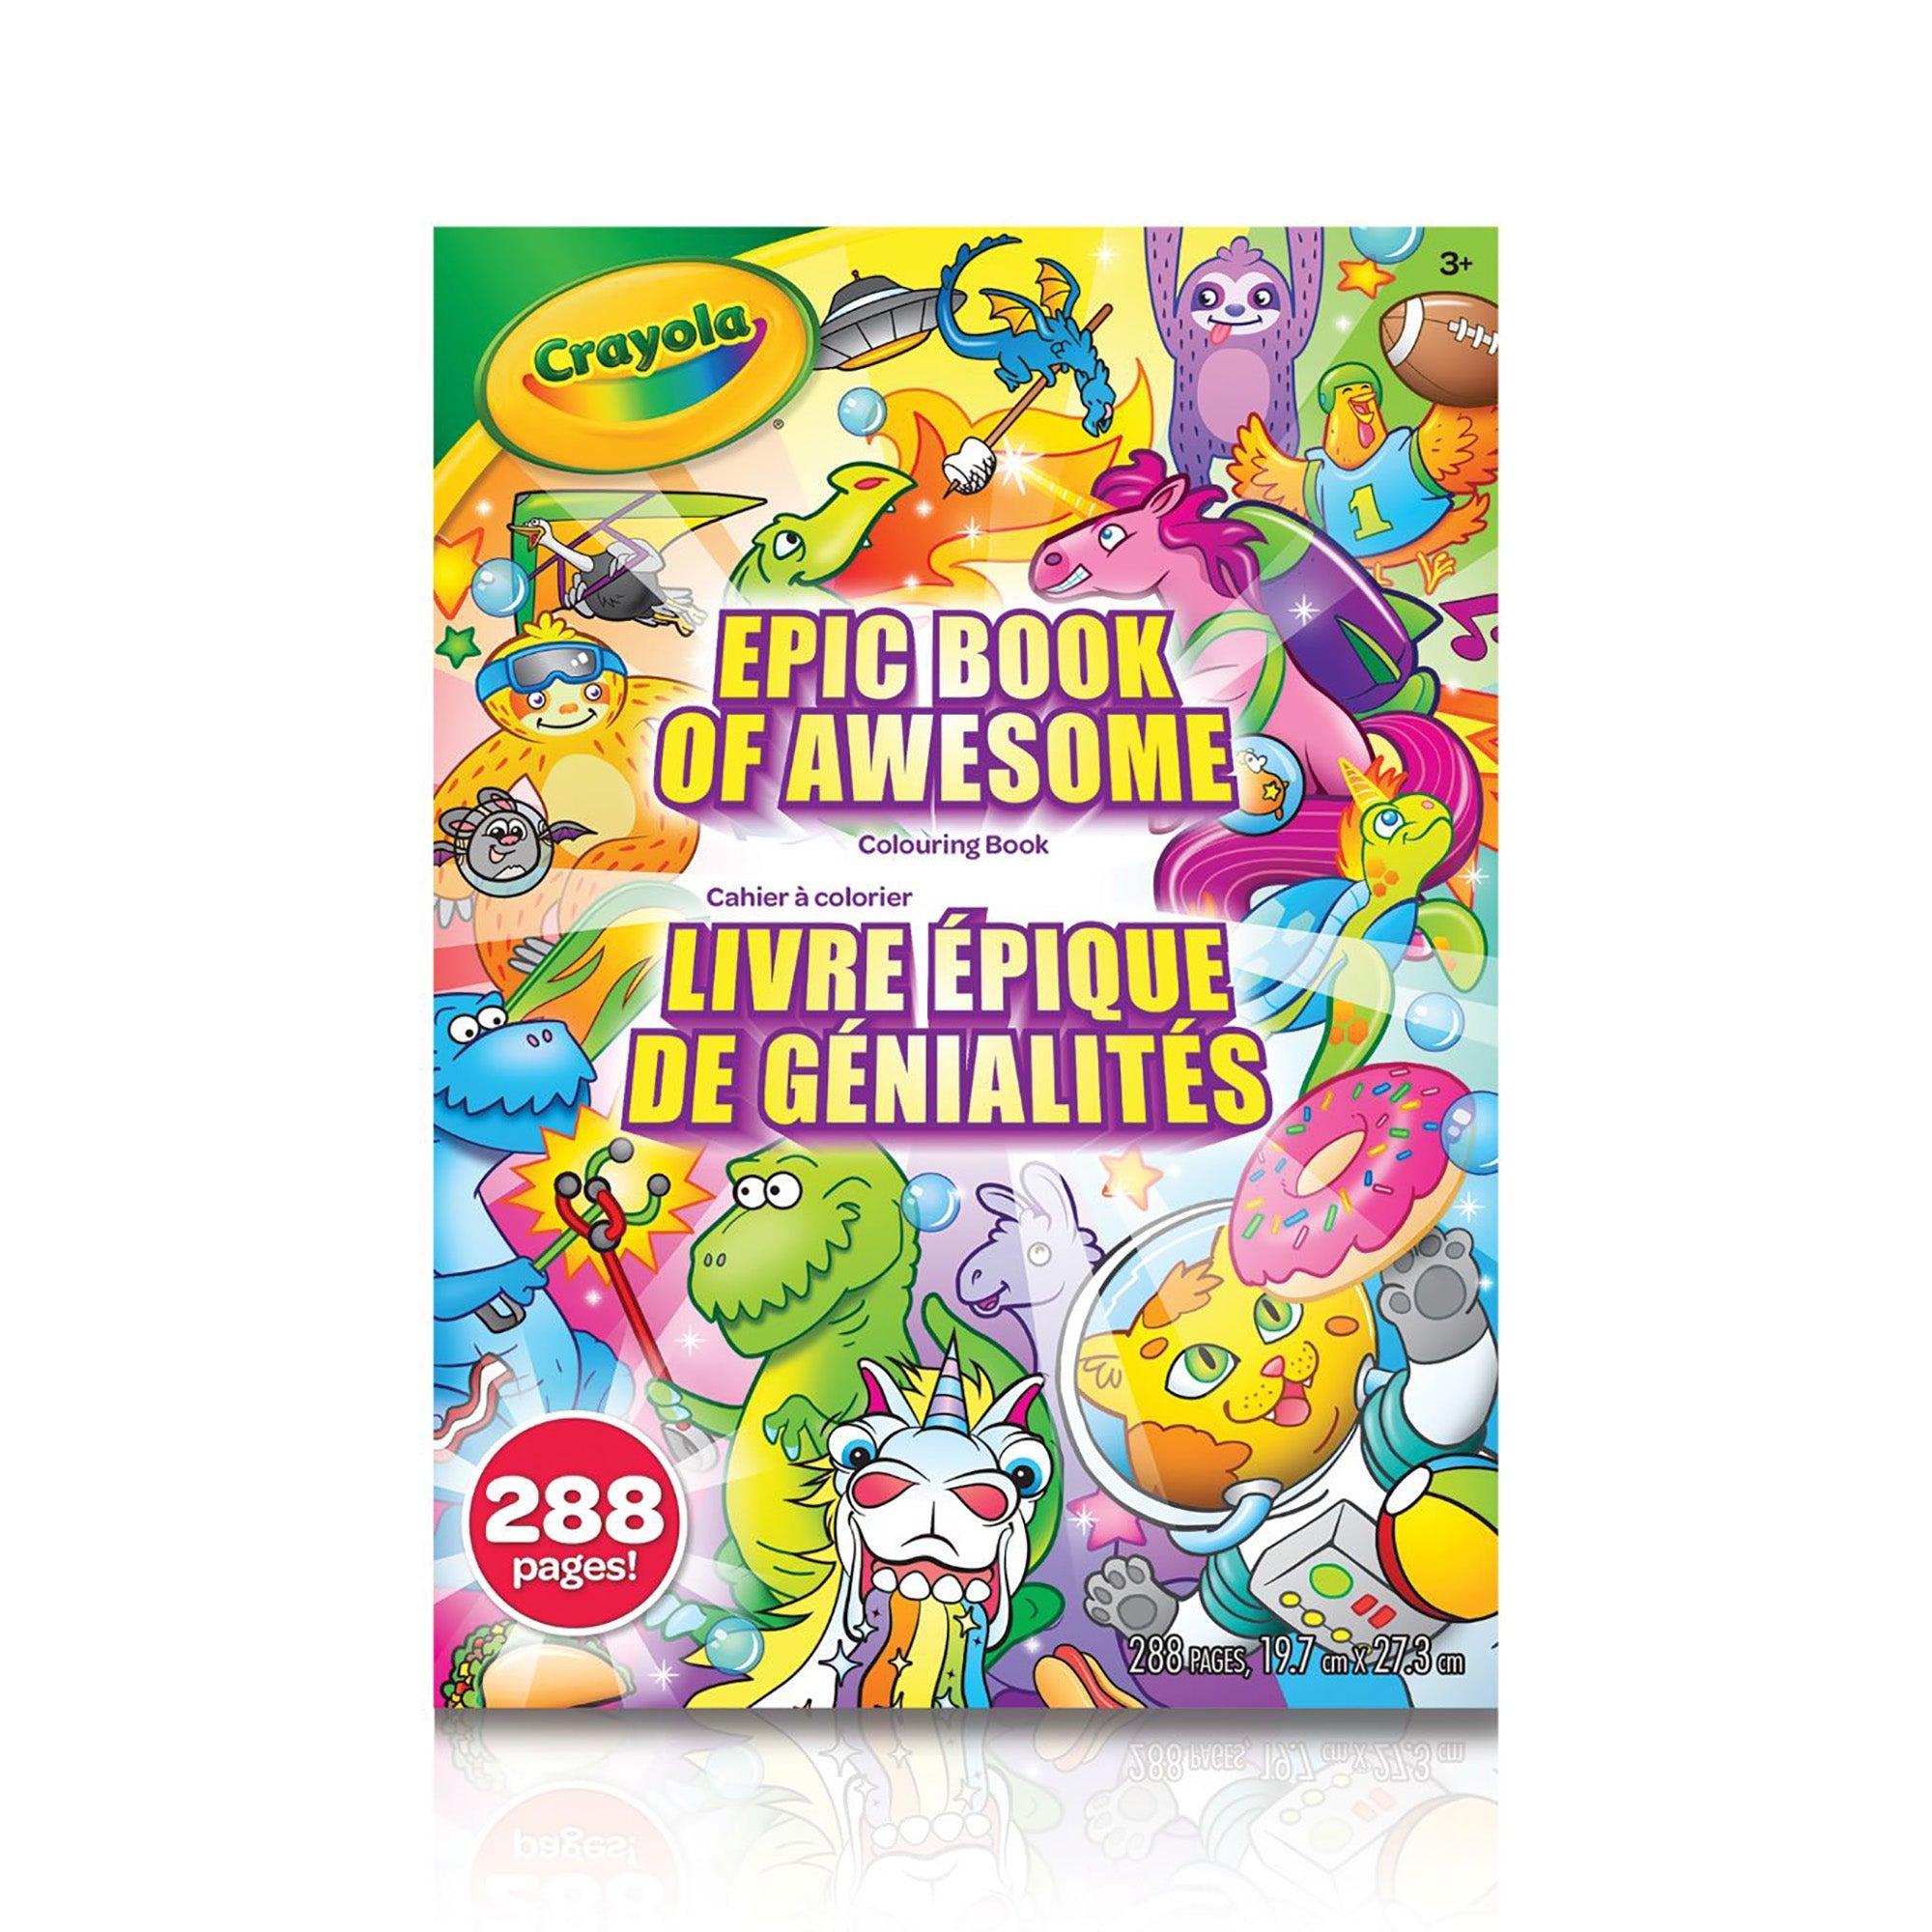 Crayola Coloring Book - 288 Pages - Book of Awesome 7.75x10.7in (19.7x27.3cm)